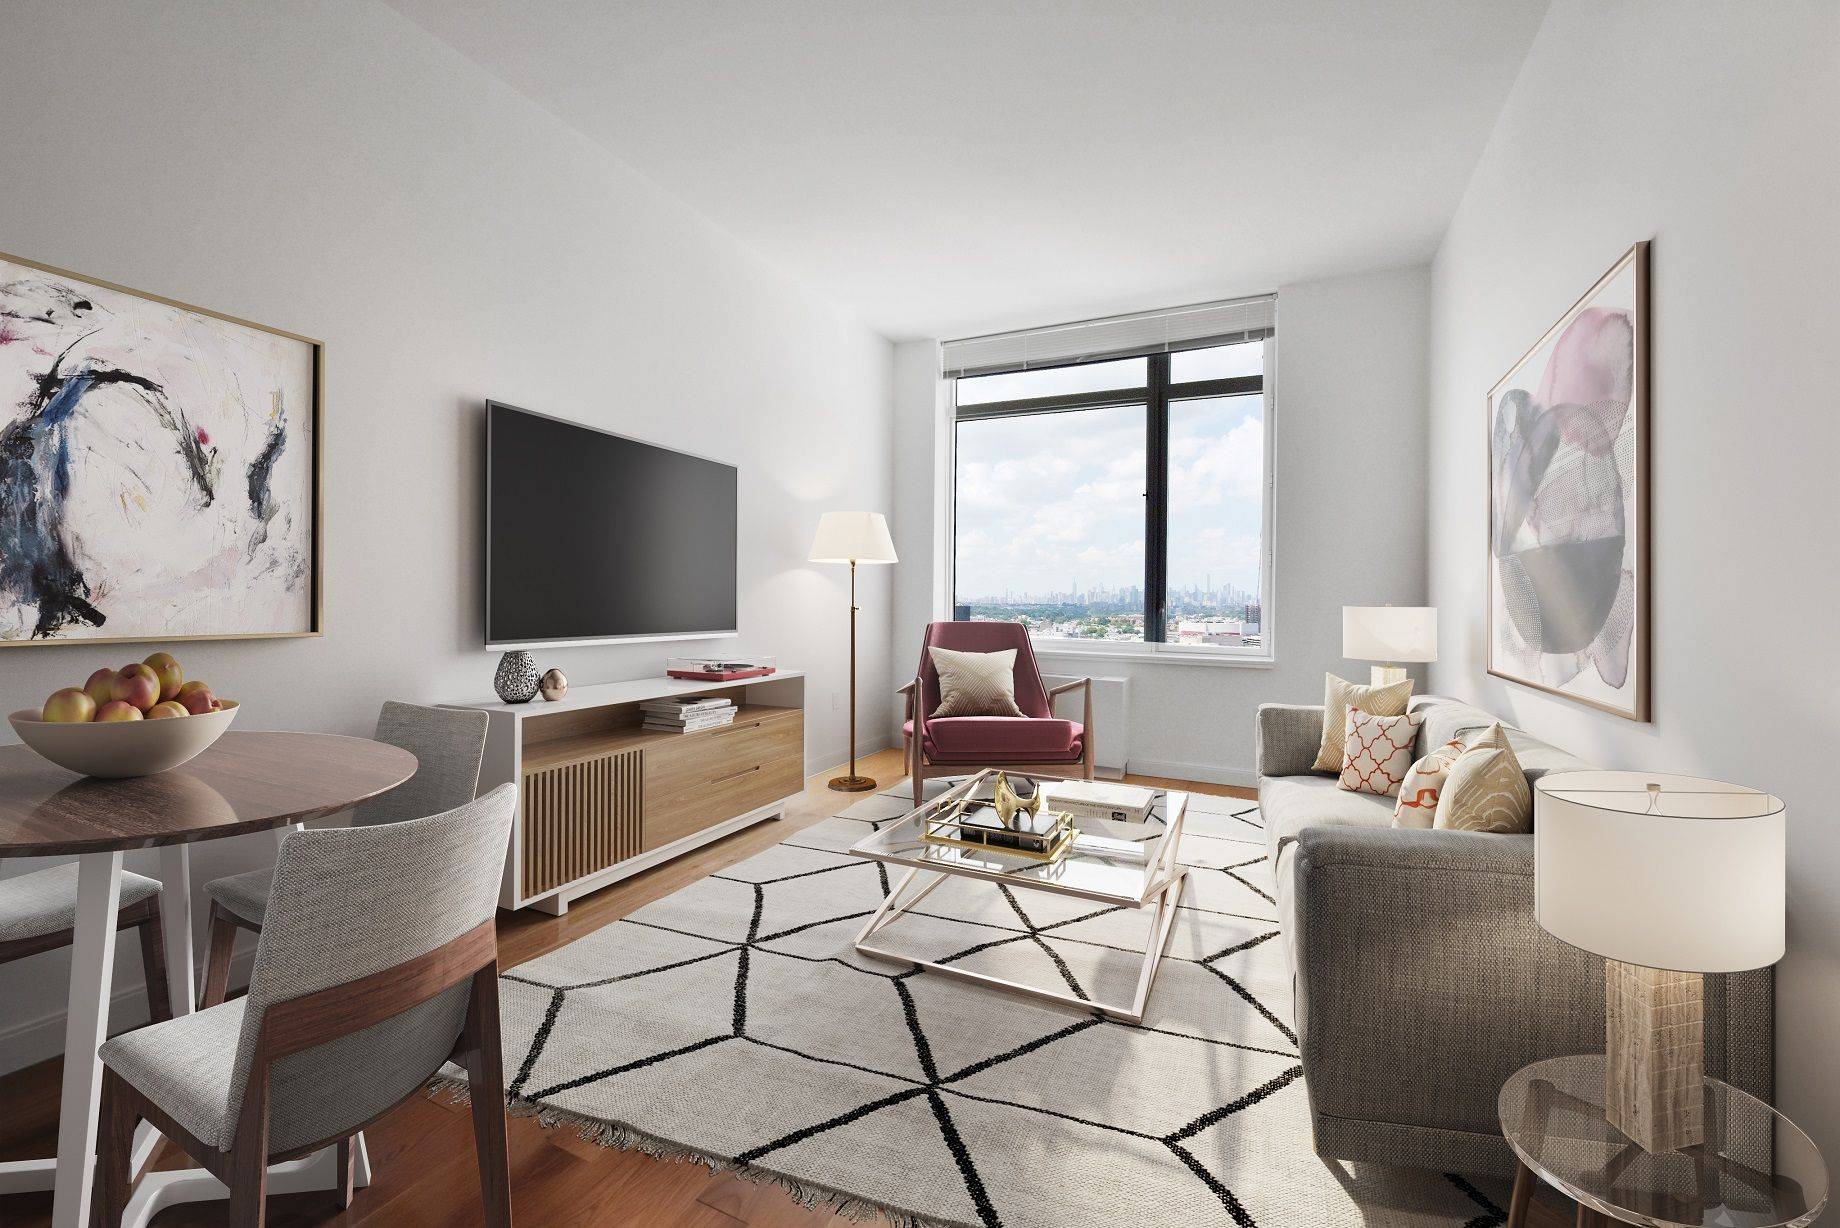 With stunning views of the Manhattan skyline, this 1BR 1BA features a fully equipped open kitchen with a breakfast bar, a spacious living room, and generous closet space.